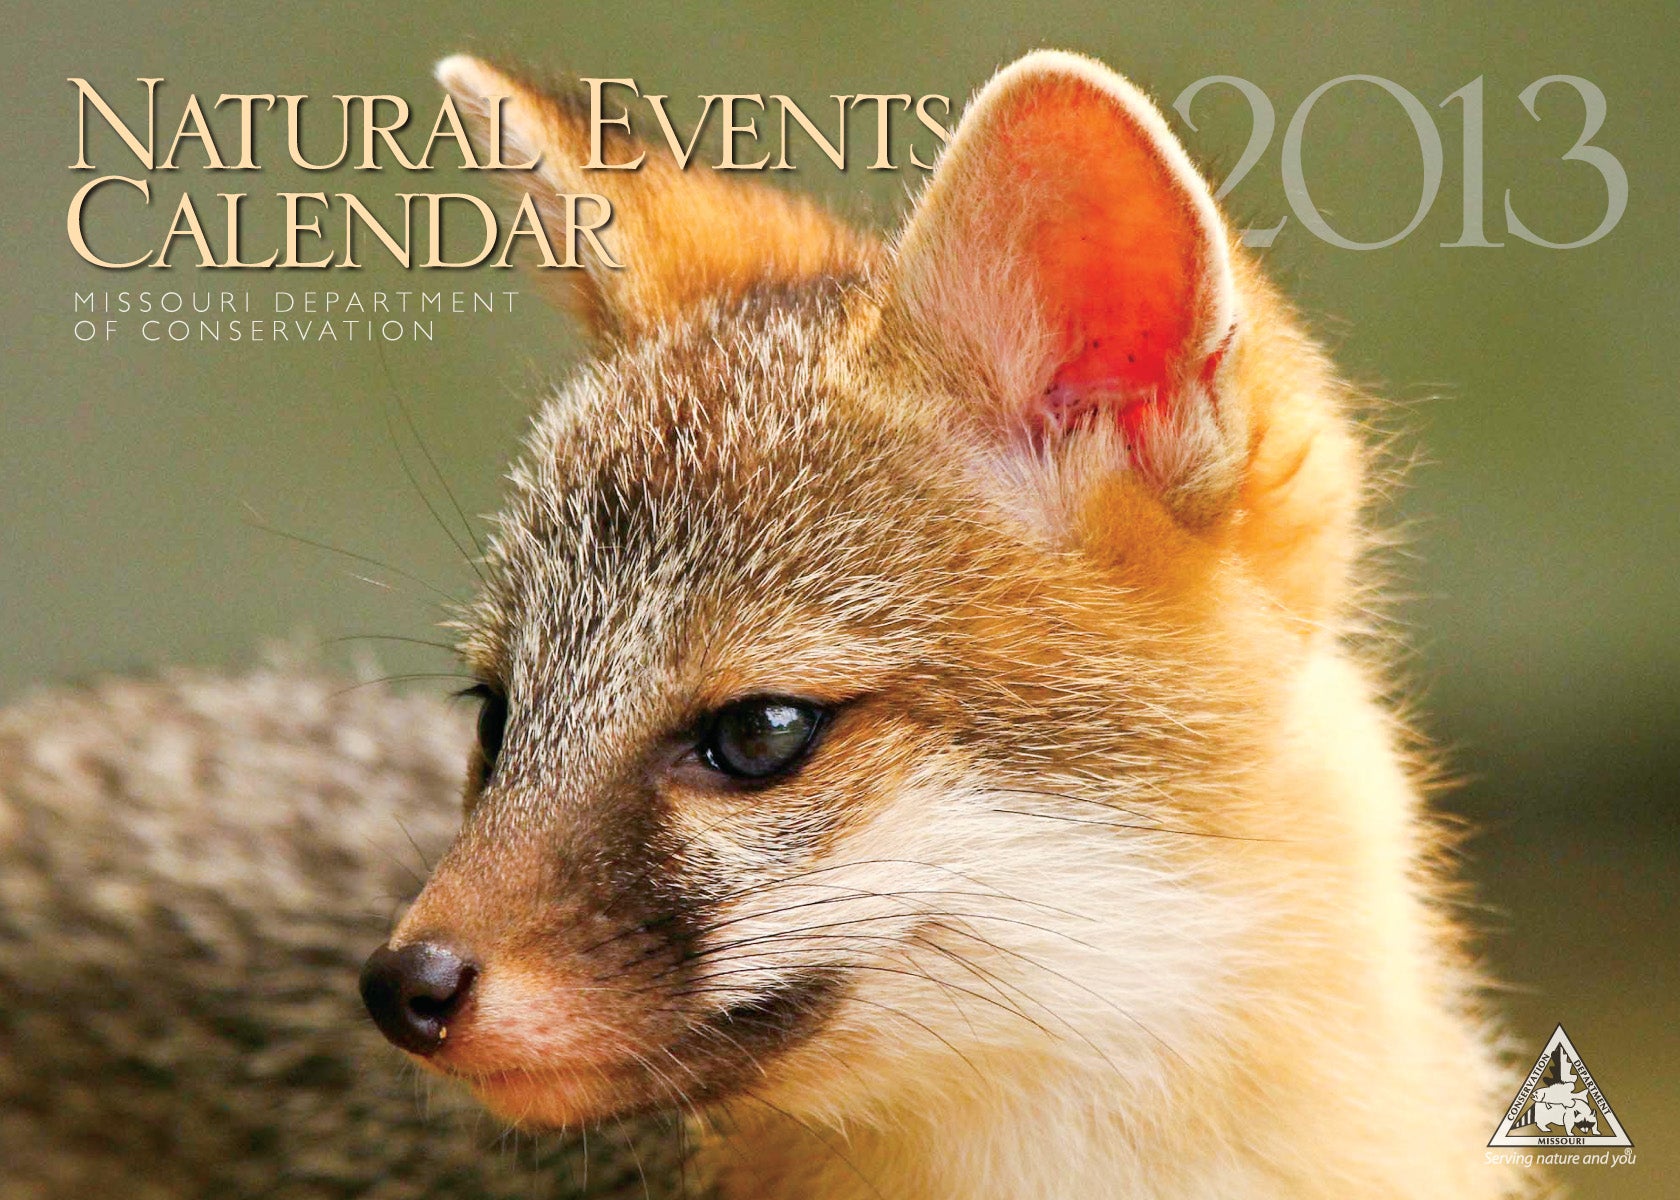 Natural Events Calendar available Oct. 18 Missouri Department of